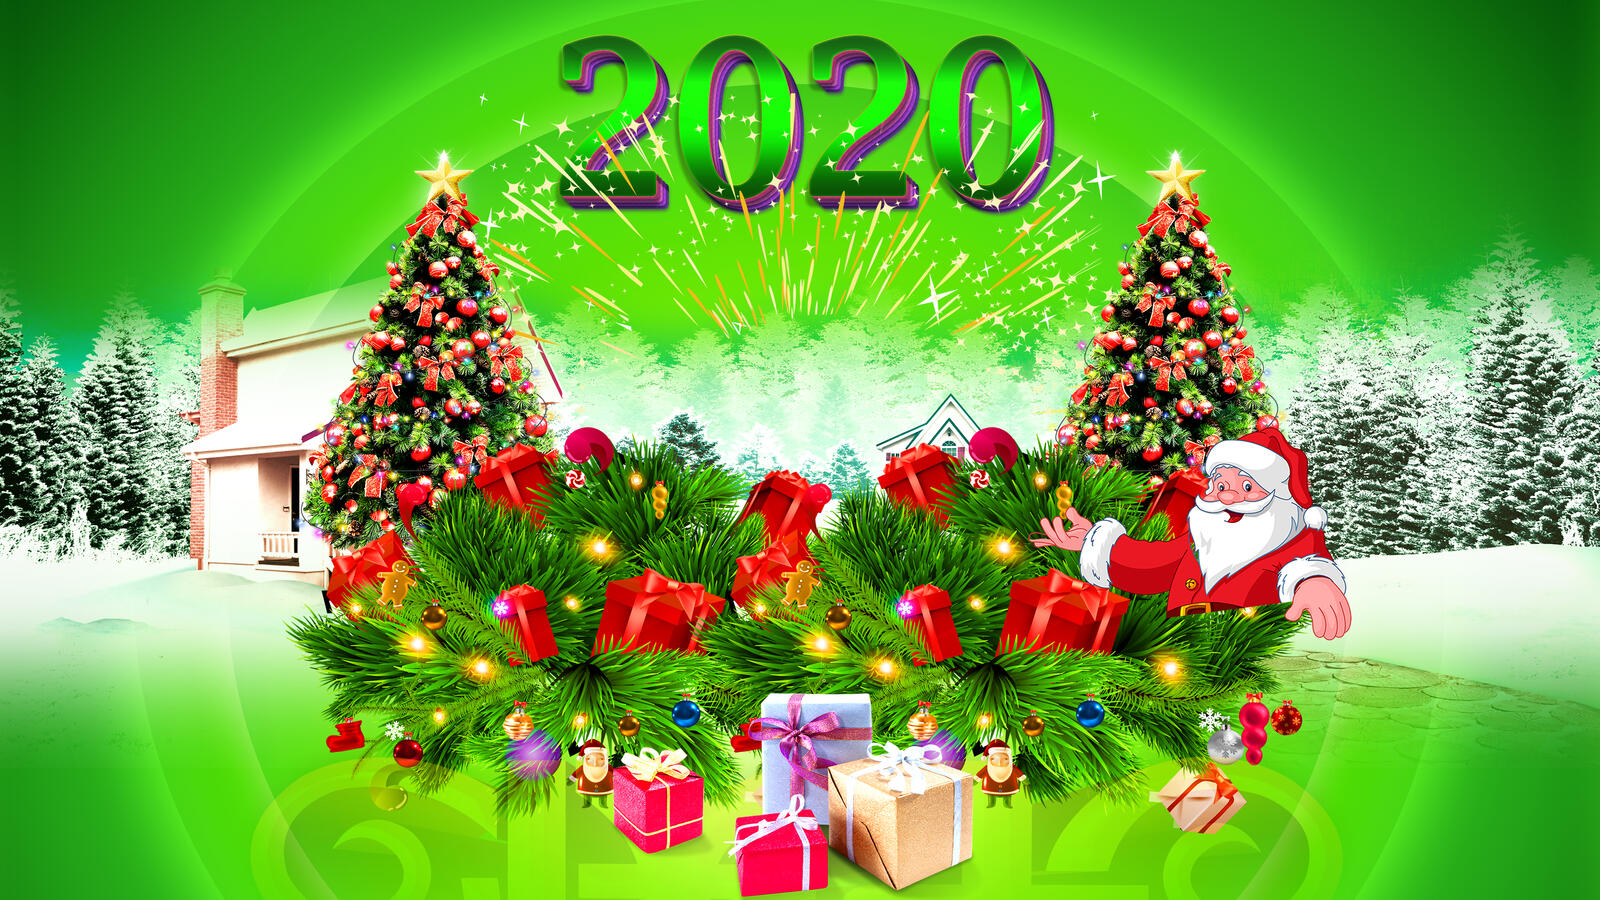 Wallpapers 2020 festive Christmas tree gifts on the desktop